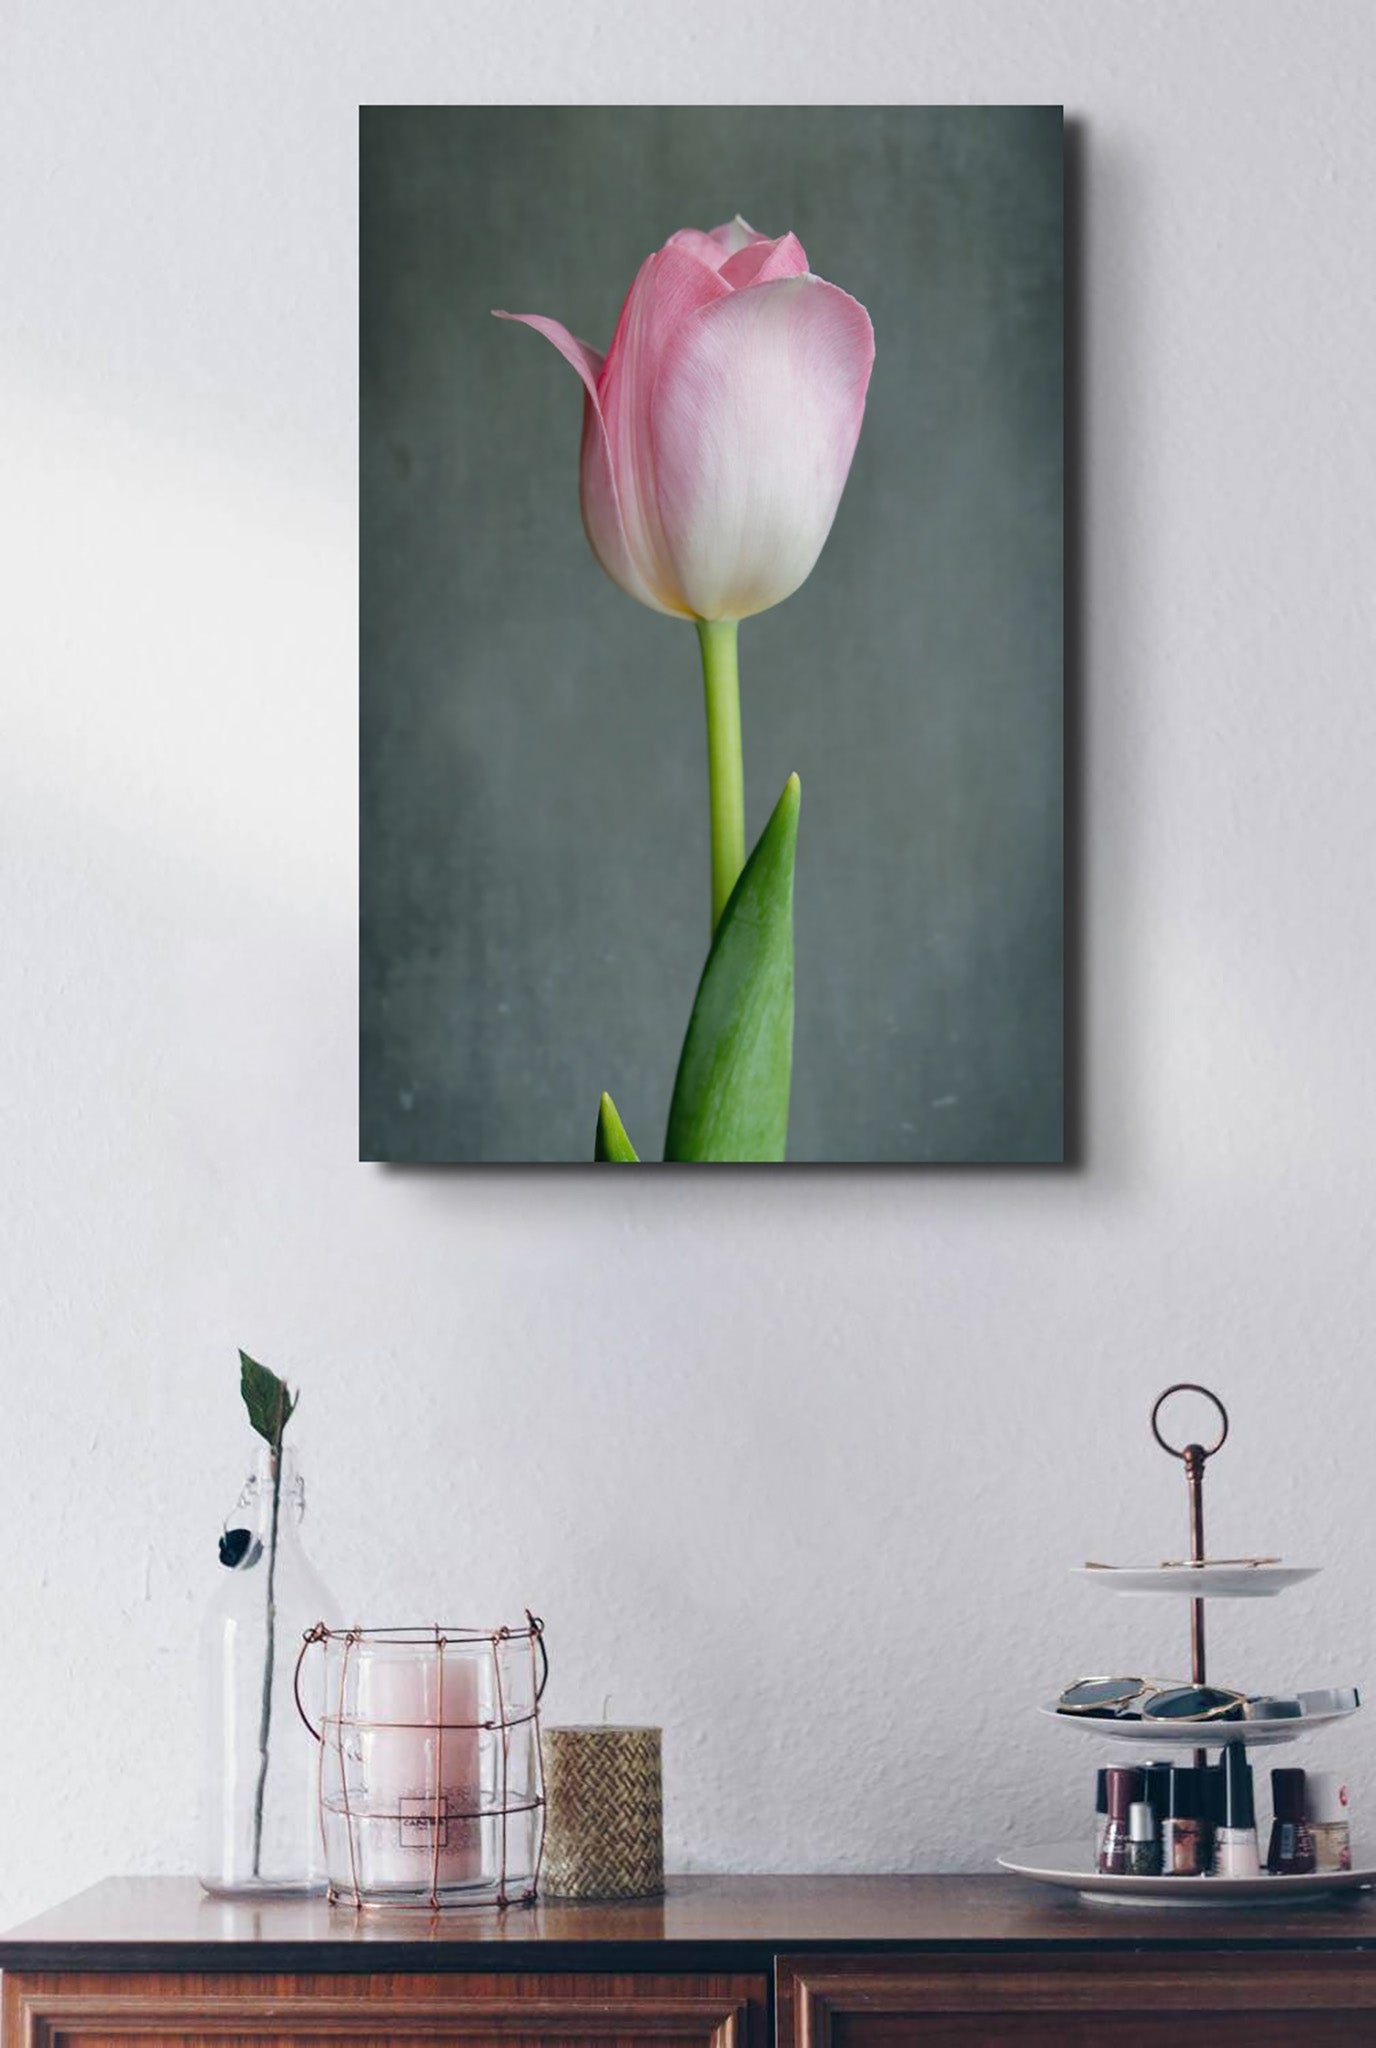 Picture hanging on the wall of a room. There is a table below the picture. The picture is a fine Art Photograph of a singular pink tulip flower on a grey background by Cameron Dreaux. 